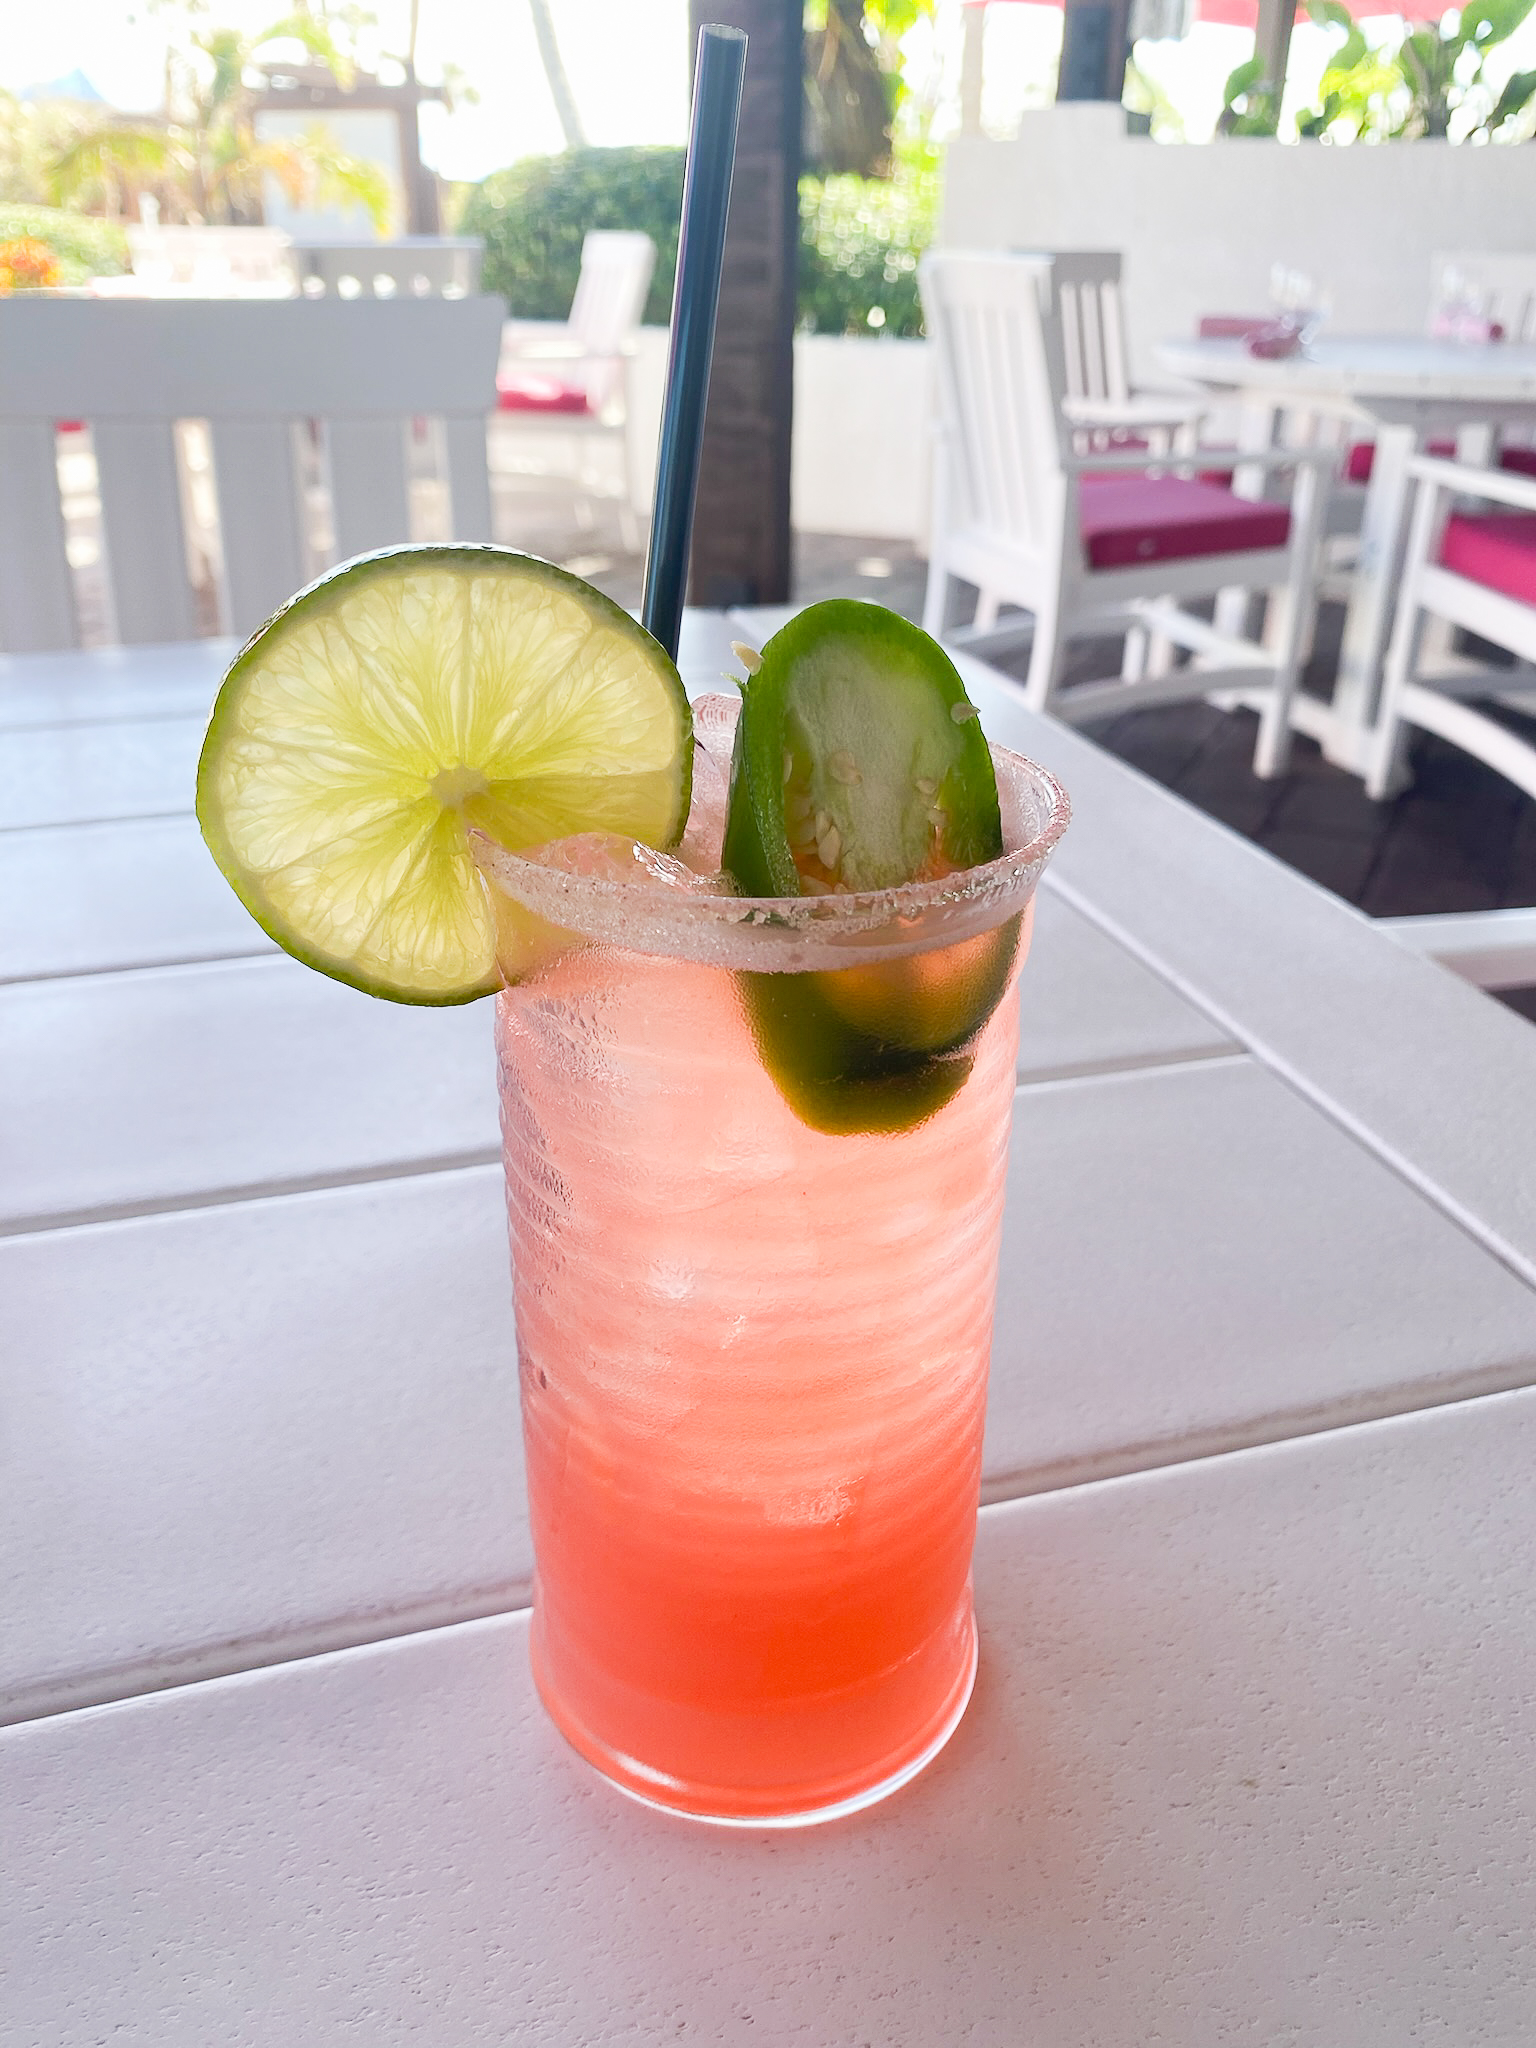 Red ombre cocktail sitting on table outdoors with a bright green lime slice and jalapeno garnish and black straw